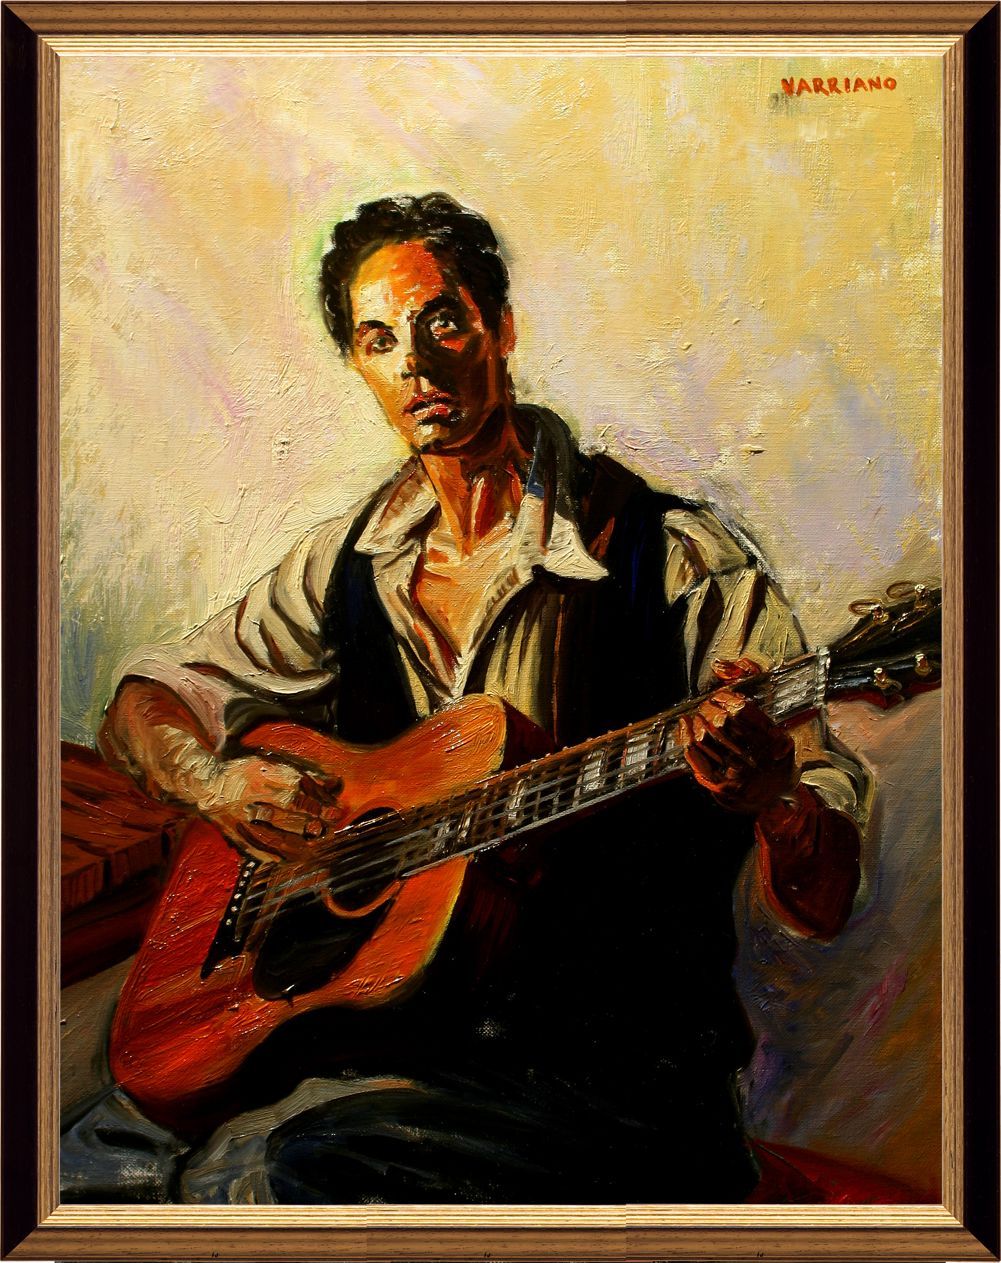 The Folk Singer | Figurative Oil Painting by John Varriano